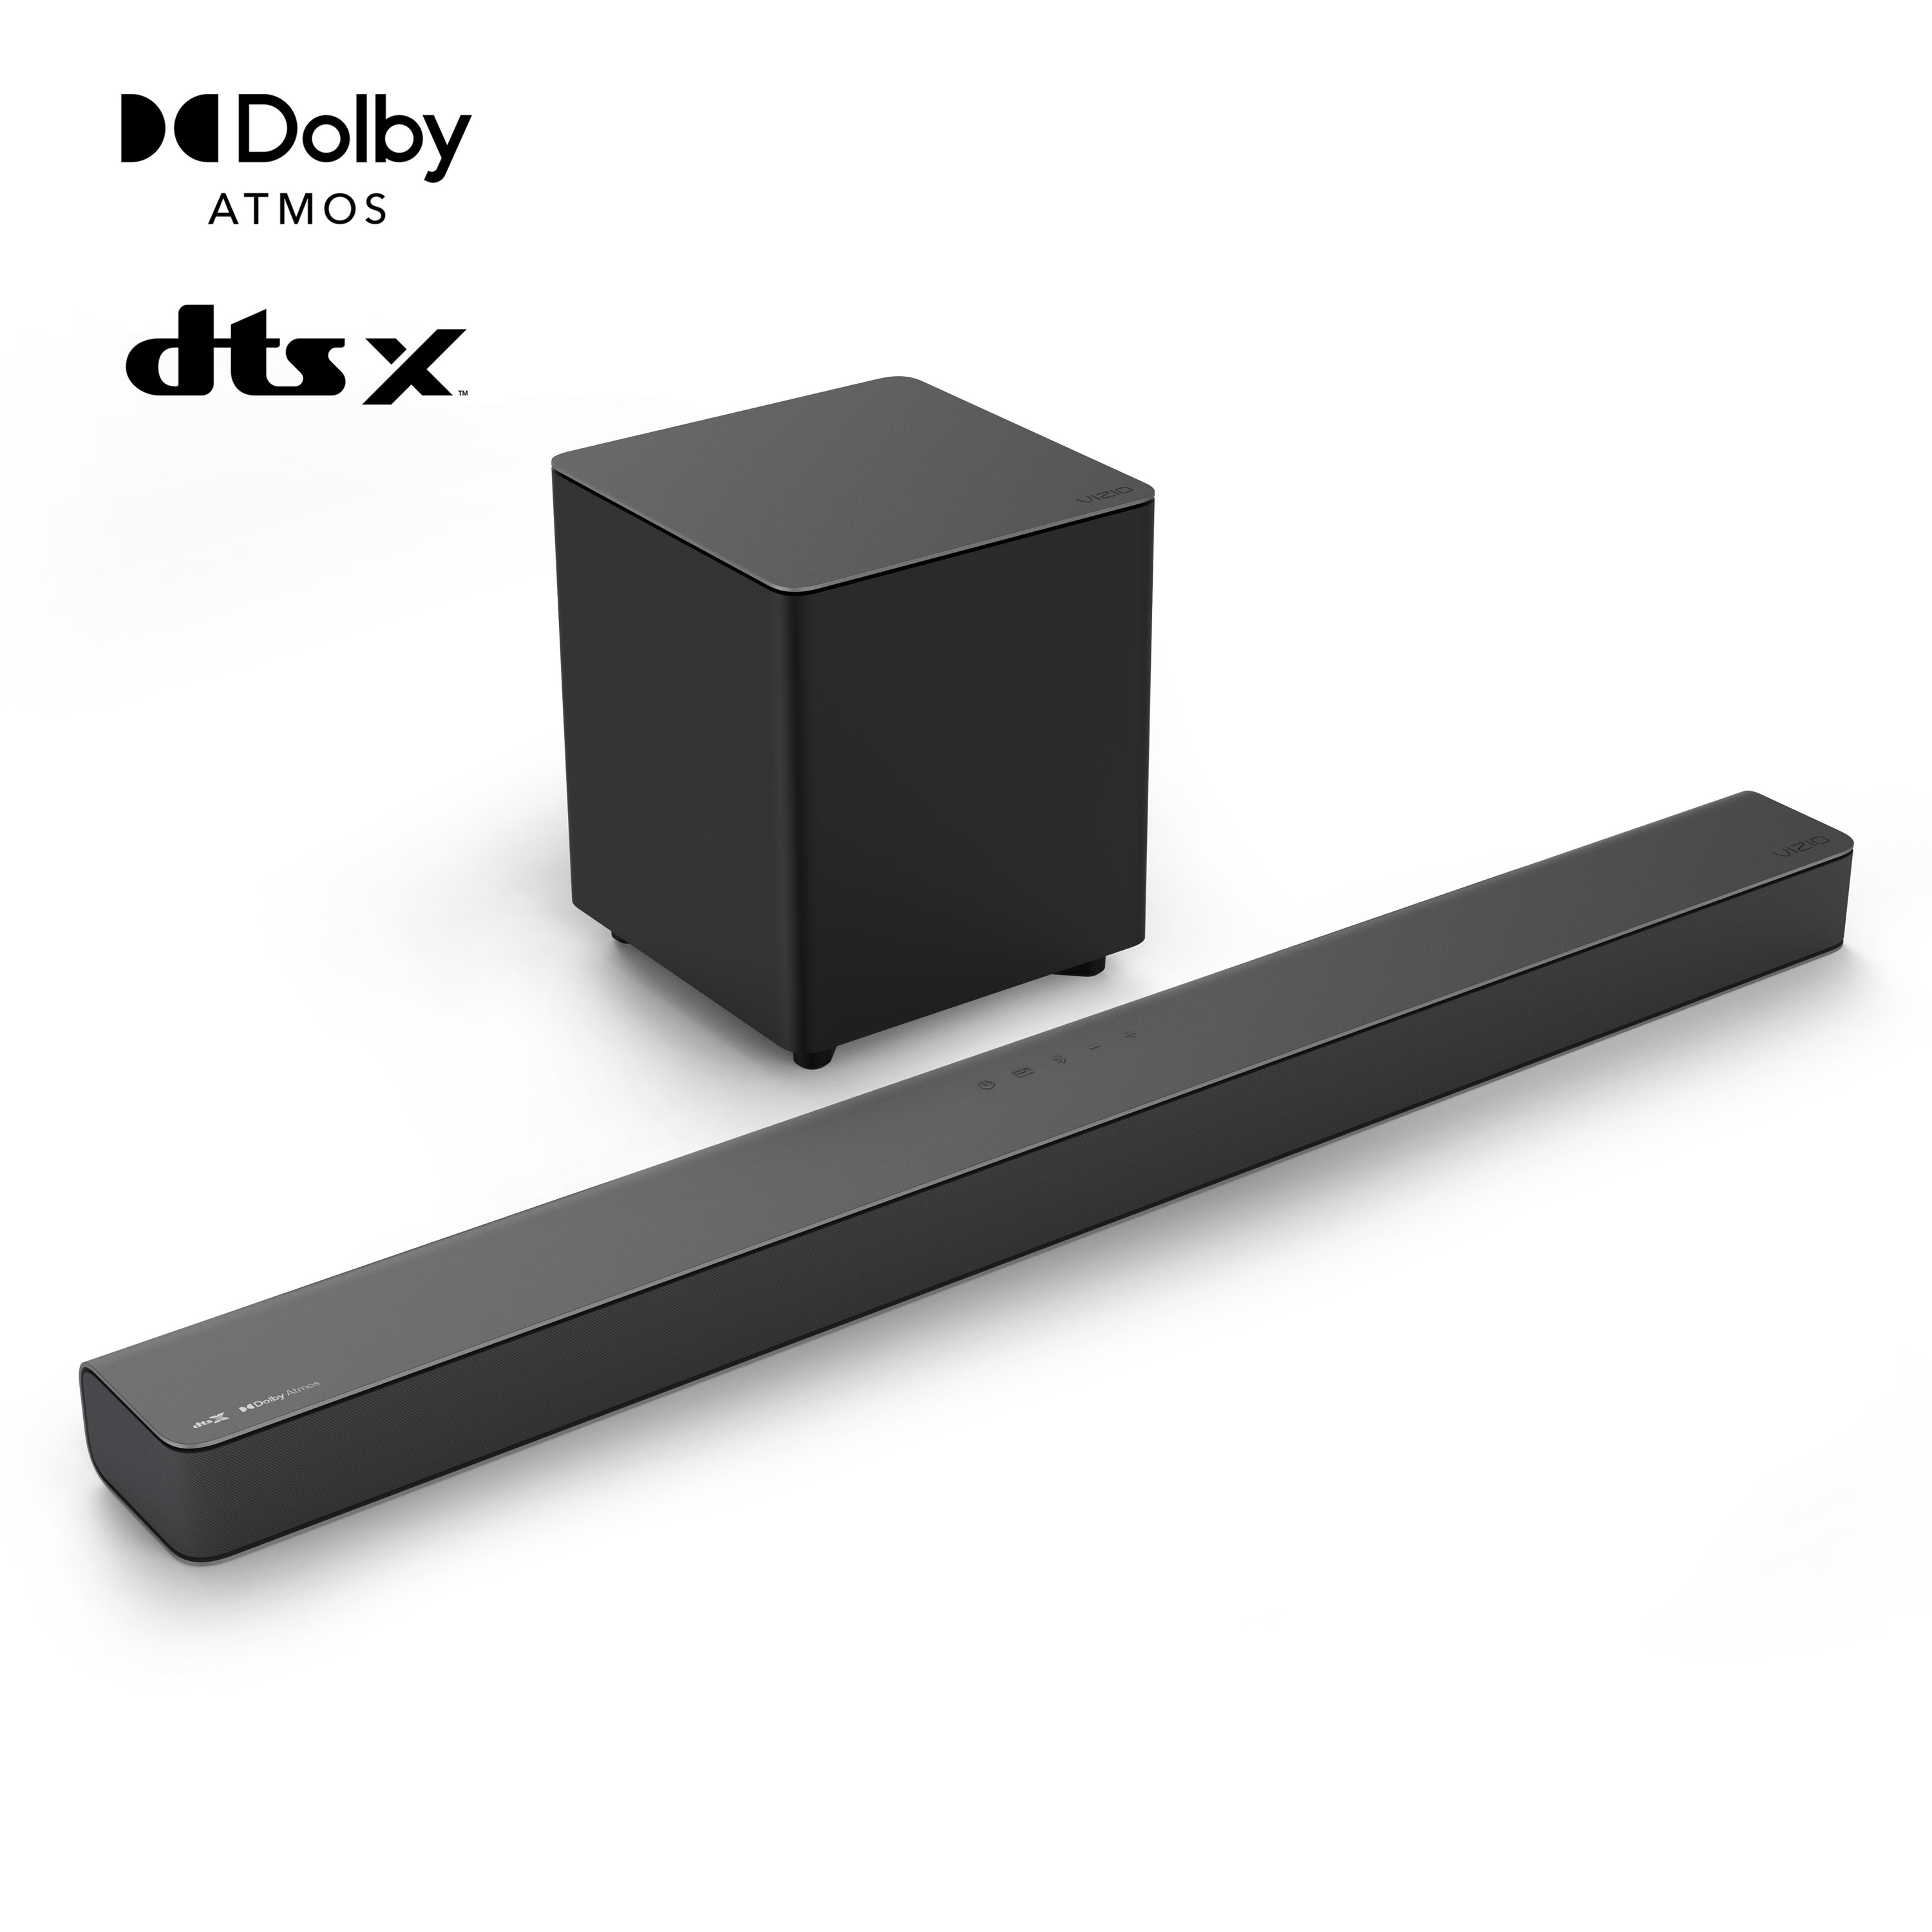 VIZIO M-Series 2.1 Premium Sound Bar with Dolby Atmos, DTS:X, Wireless Subwoofer M215a-J6 - image 1 of 21